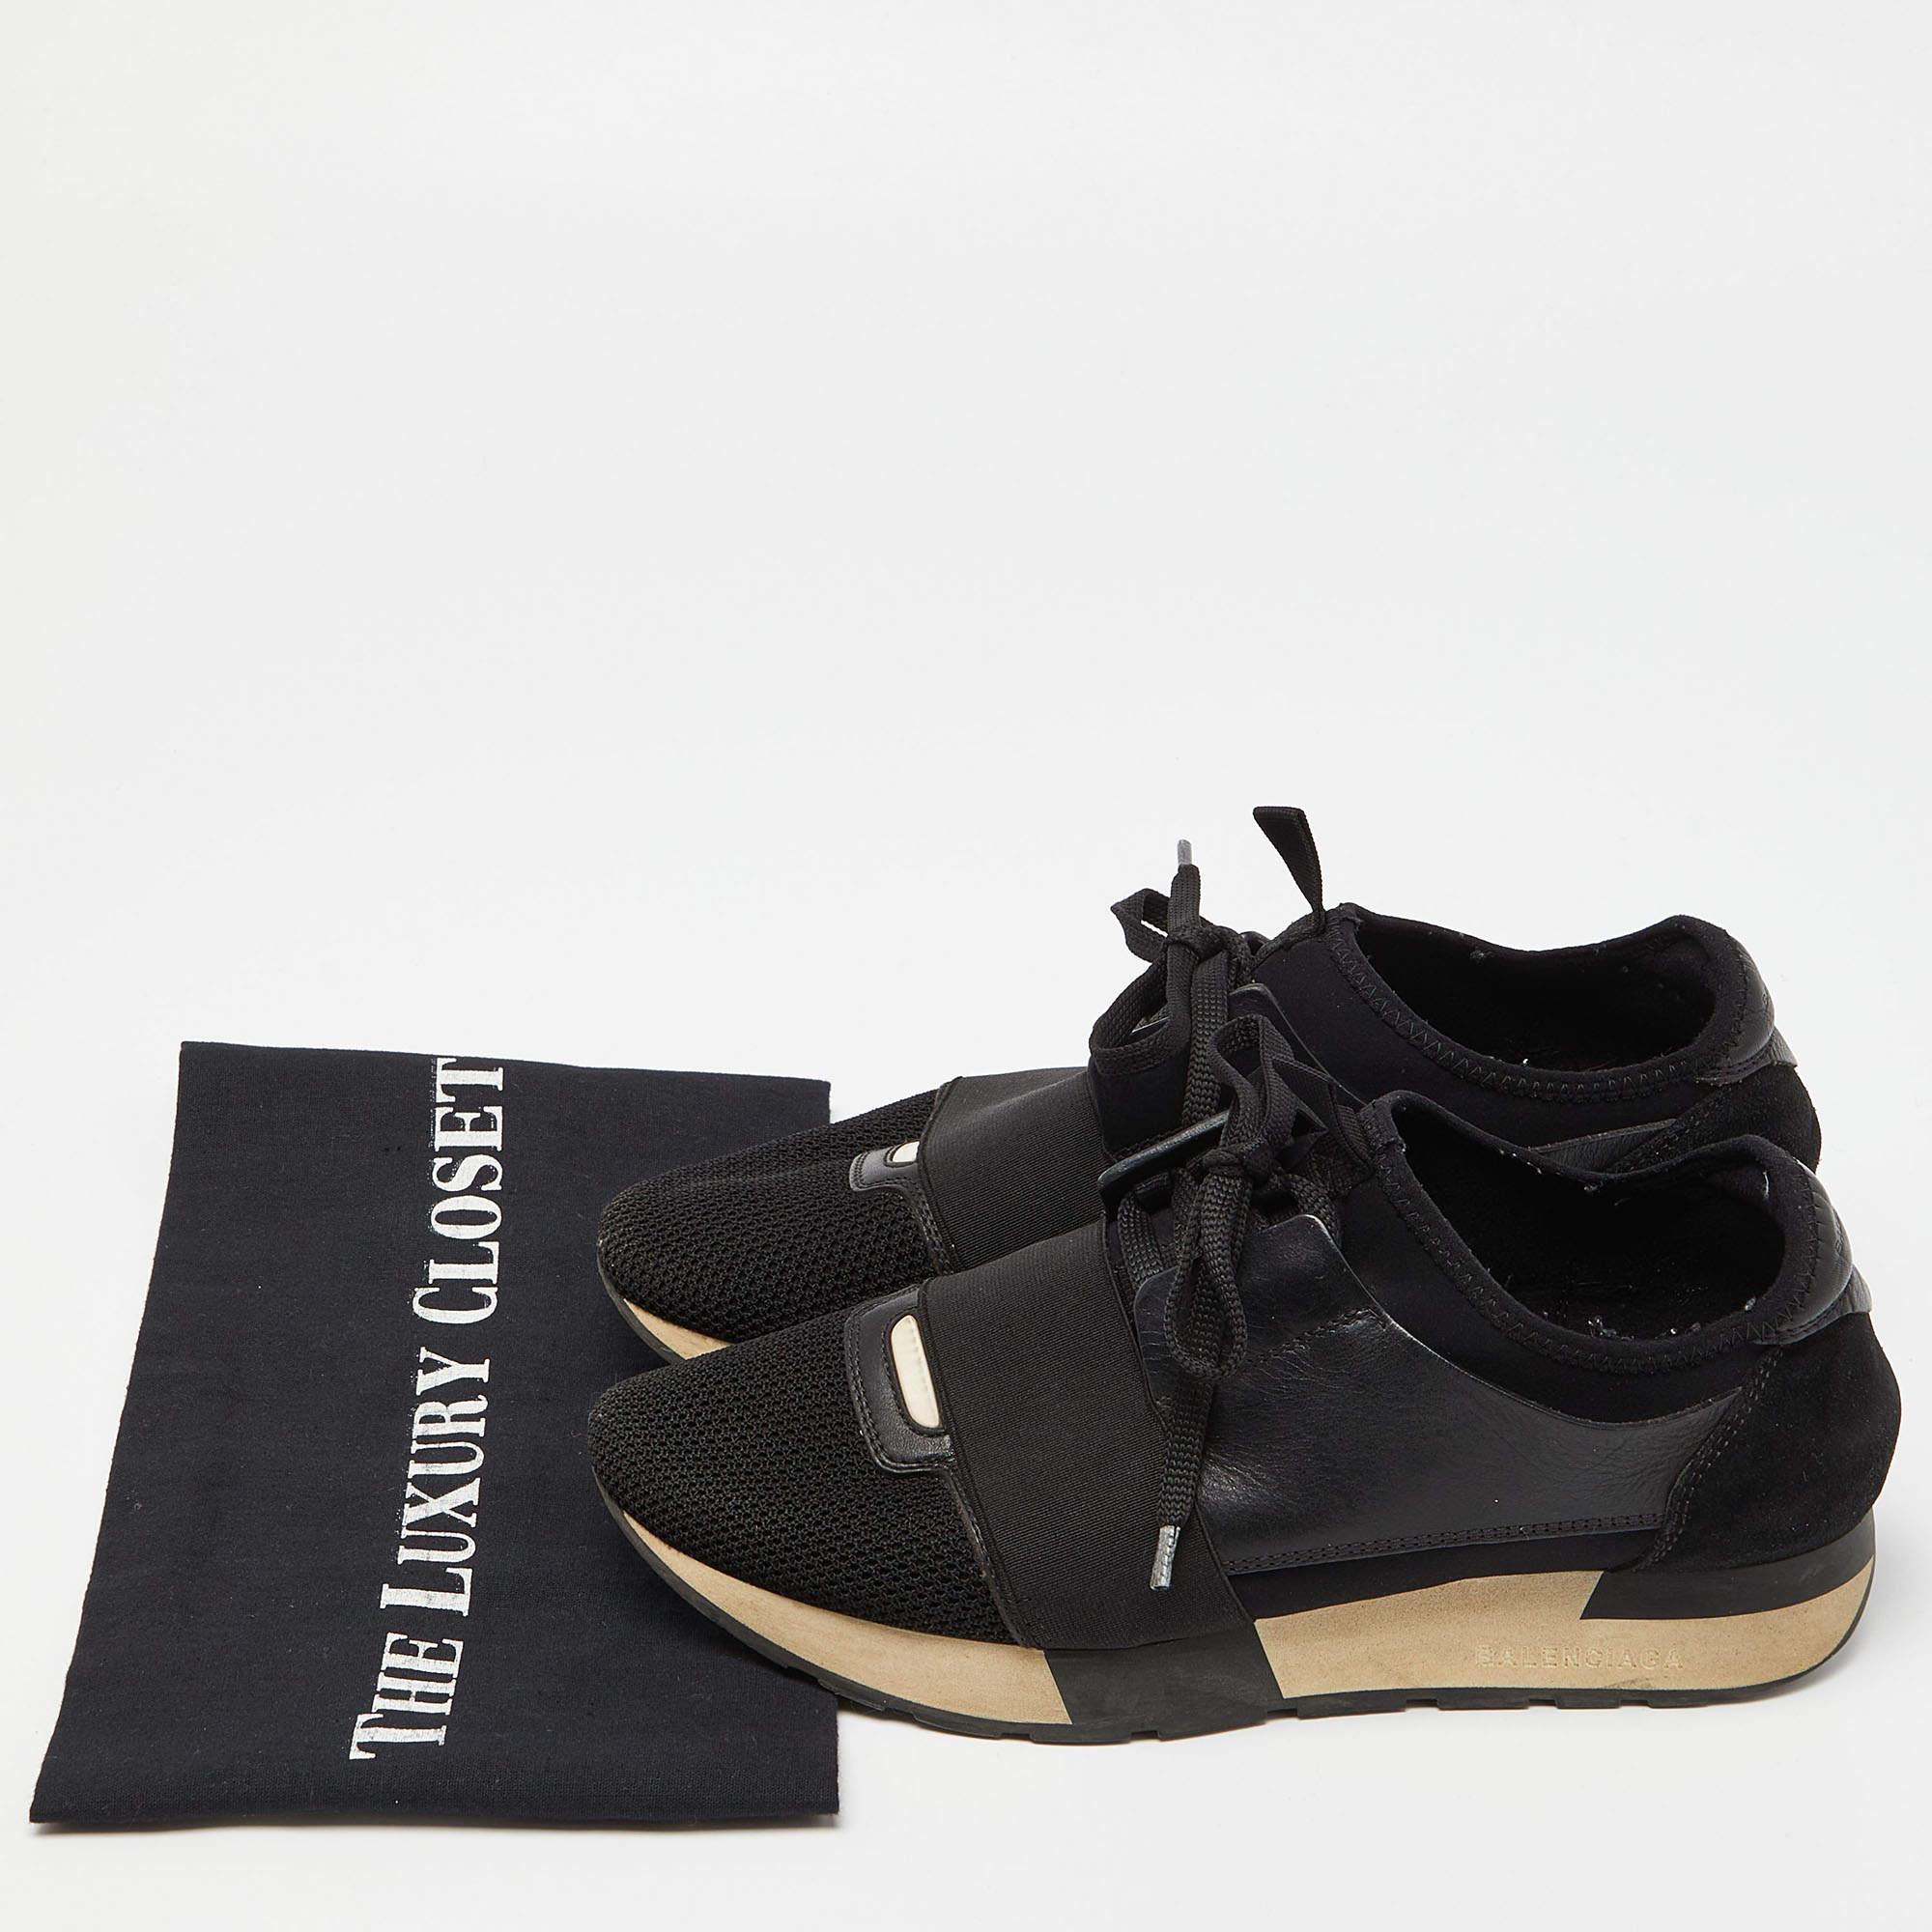 Balenciaga Black Leather, Mesh and Suede Race Runner Sneakers For Sale 5